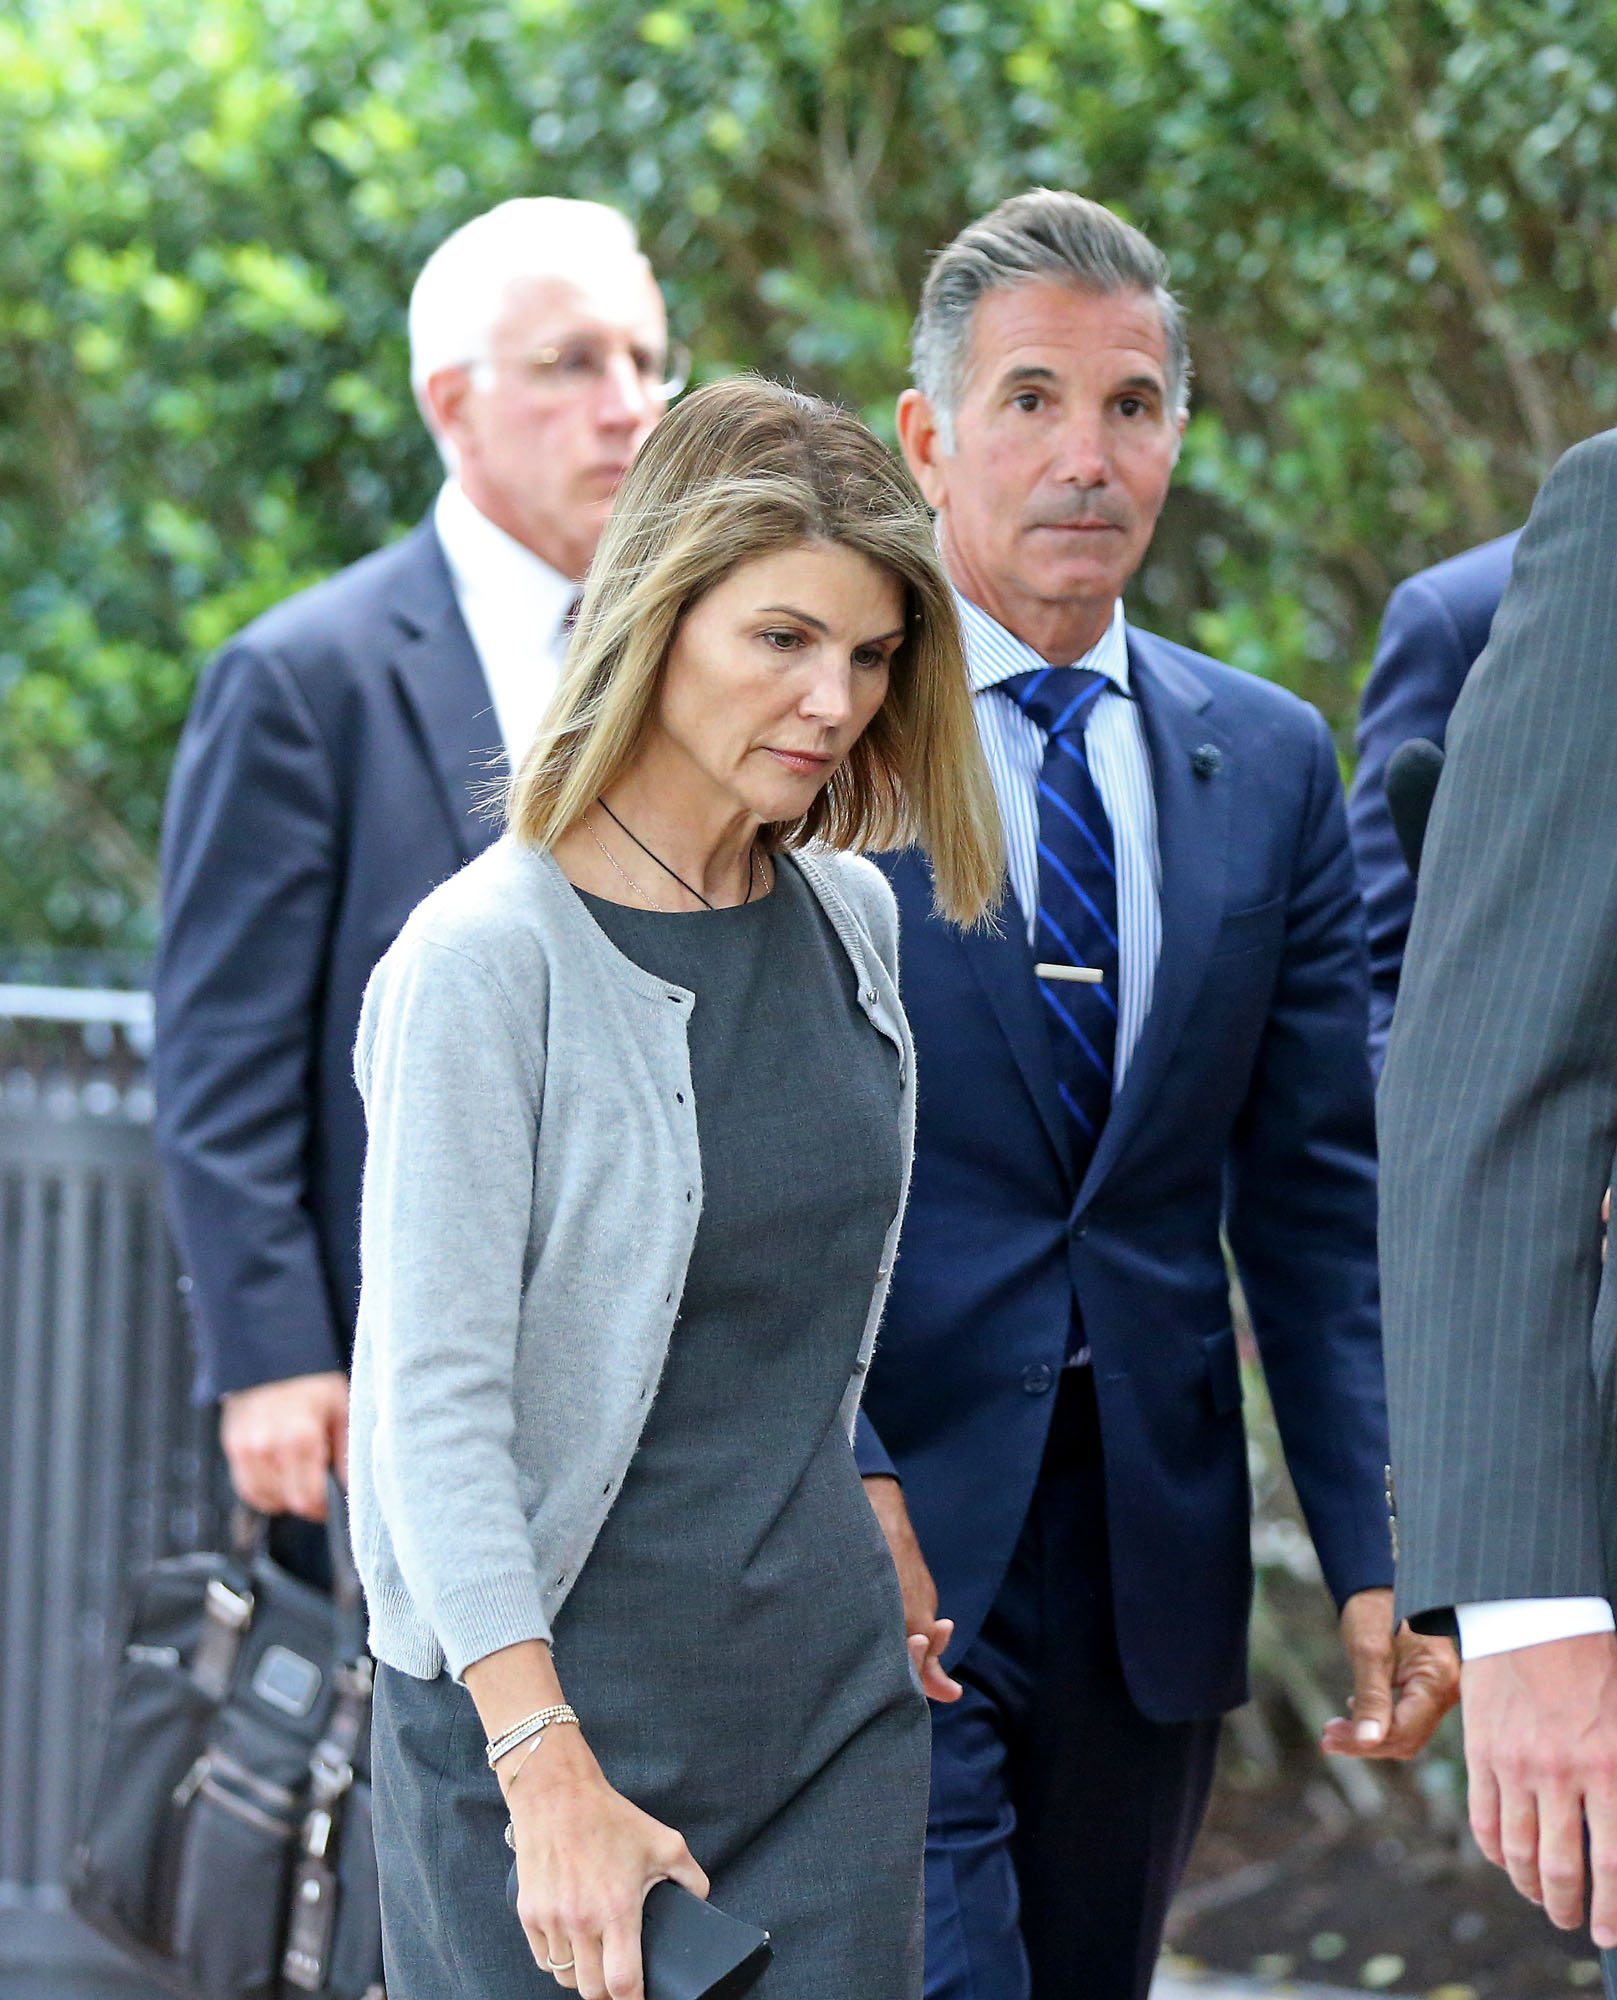 Lori Loughlin and Mossimo Giannulli leave Moakley Federal Courthouse after a brief hearing on August 27, 2019 in Boston, Massachusetts | Photo: Getty Images